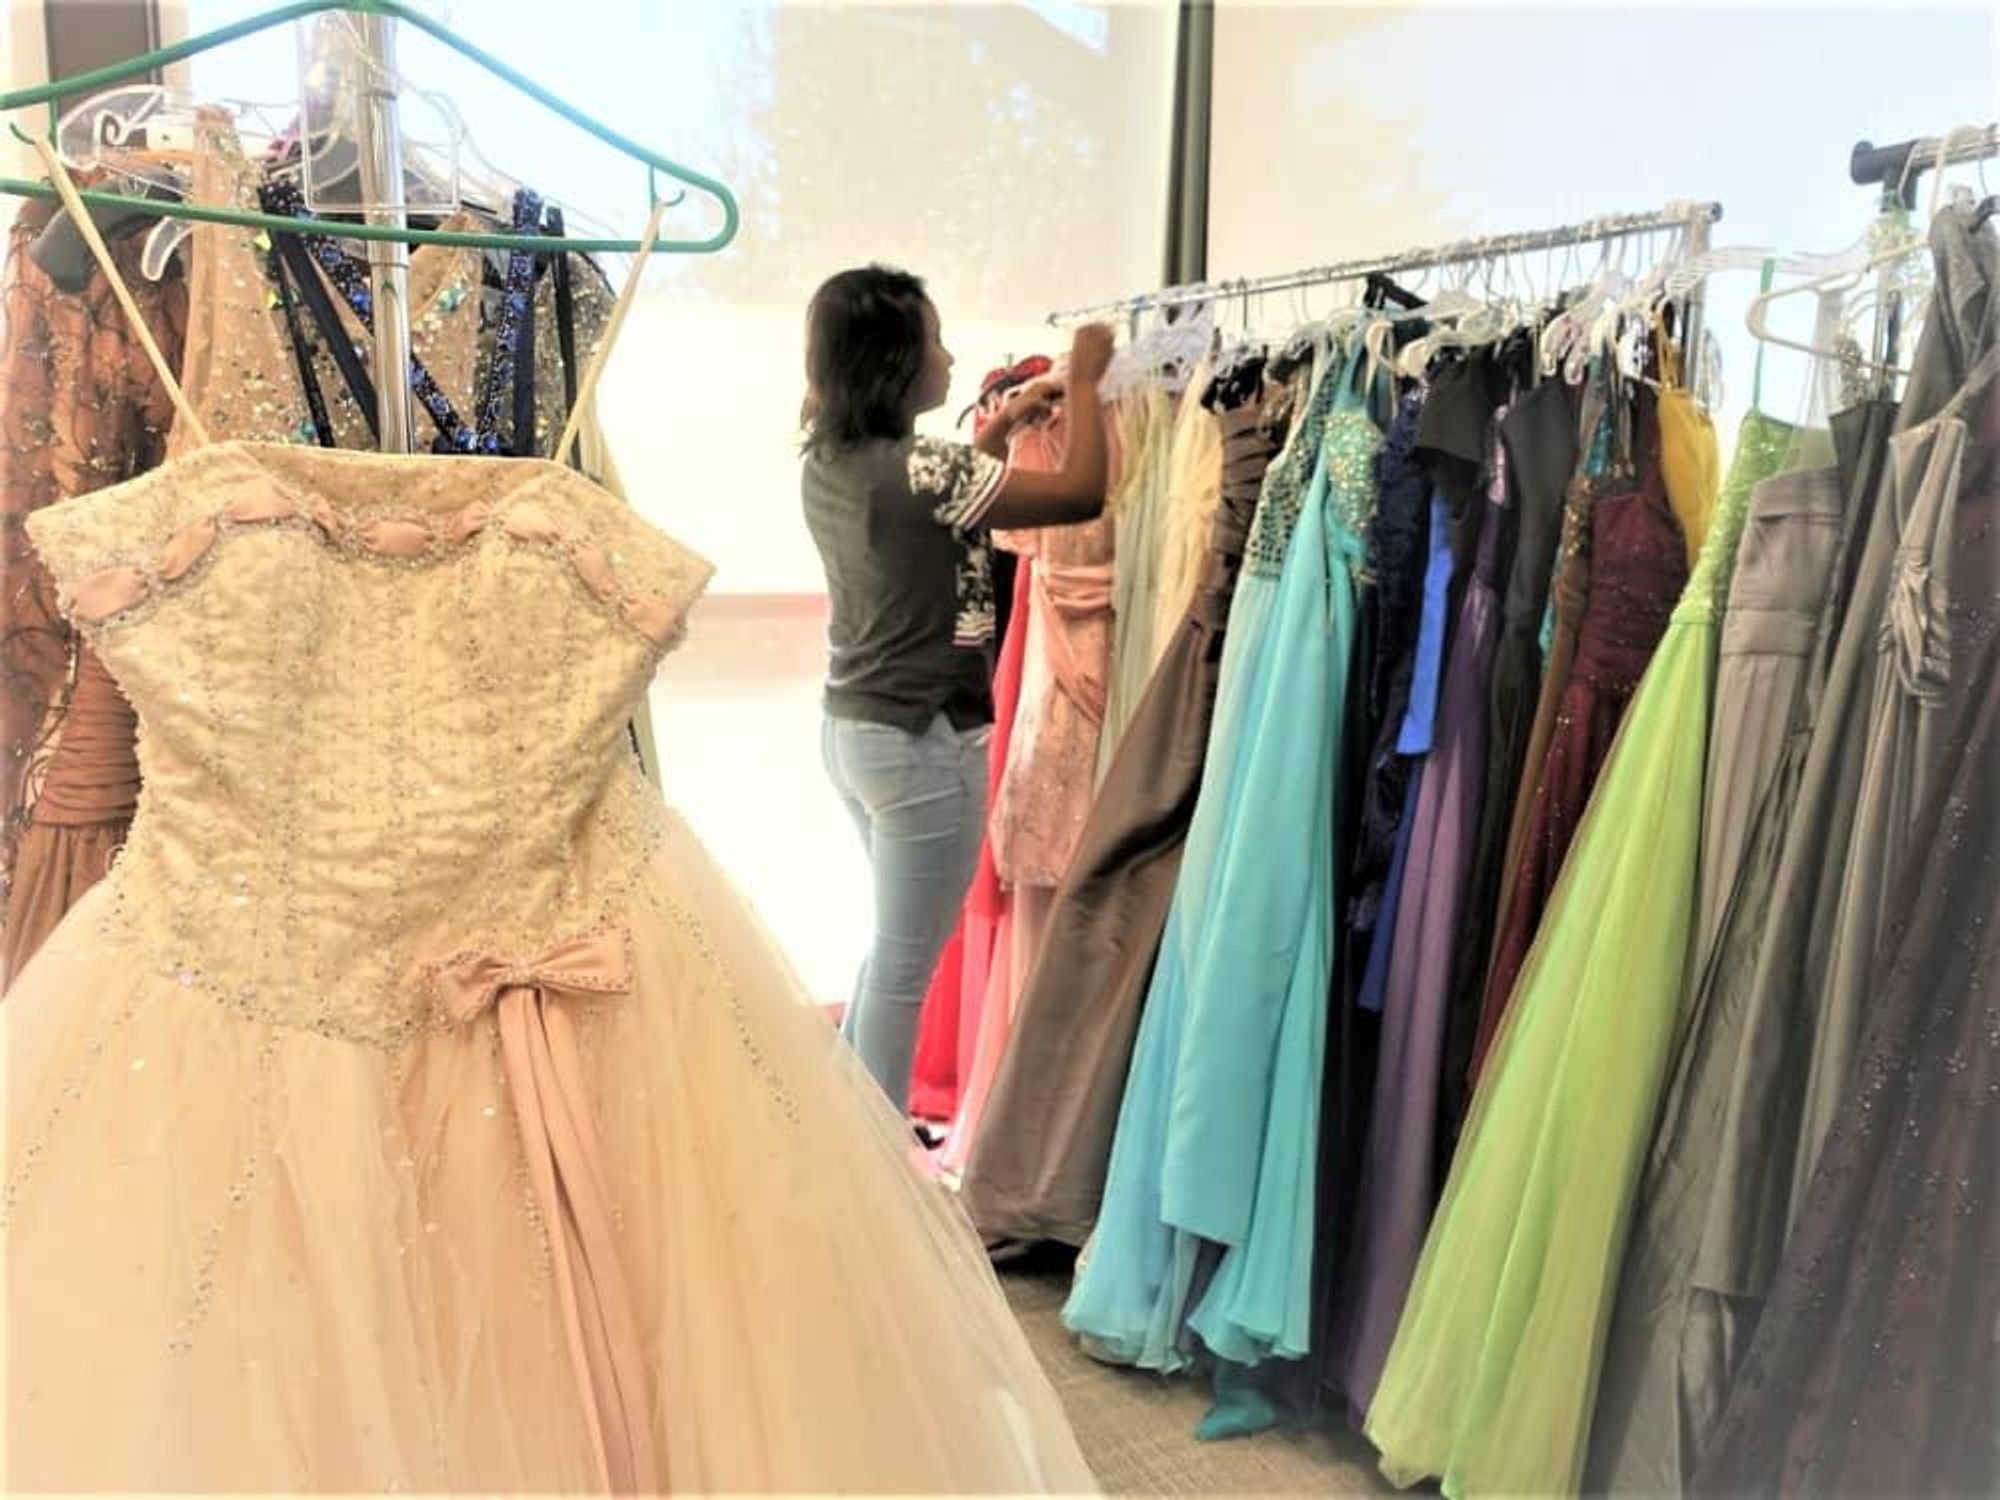 Teen Who Drove 6 Hours to Shop for Prom Gifted $700 Dress